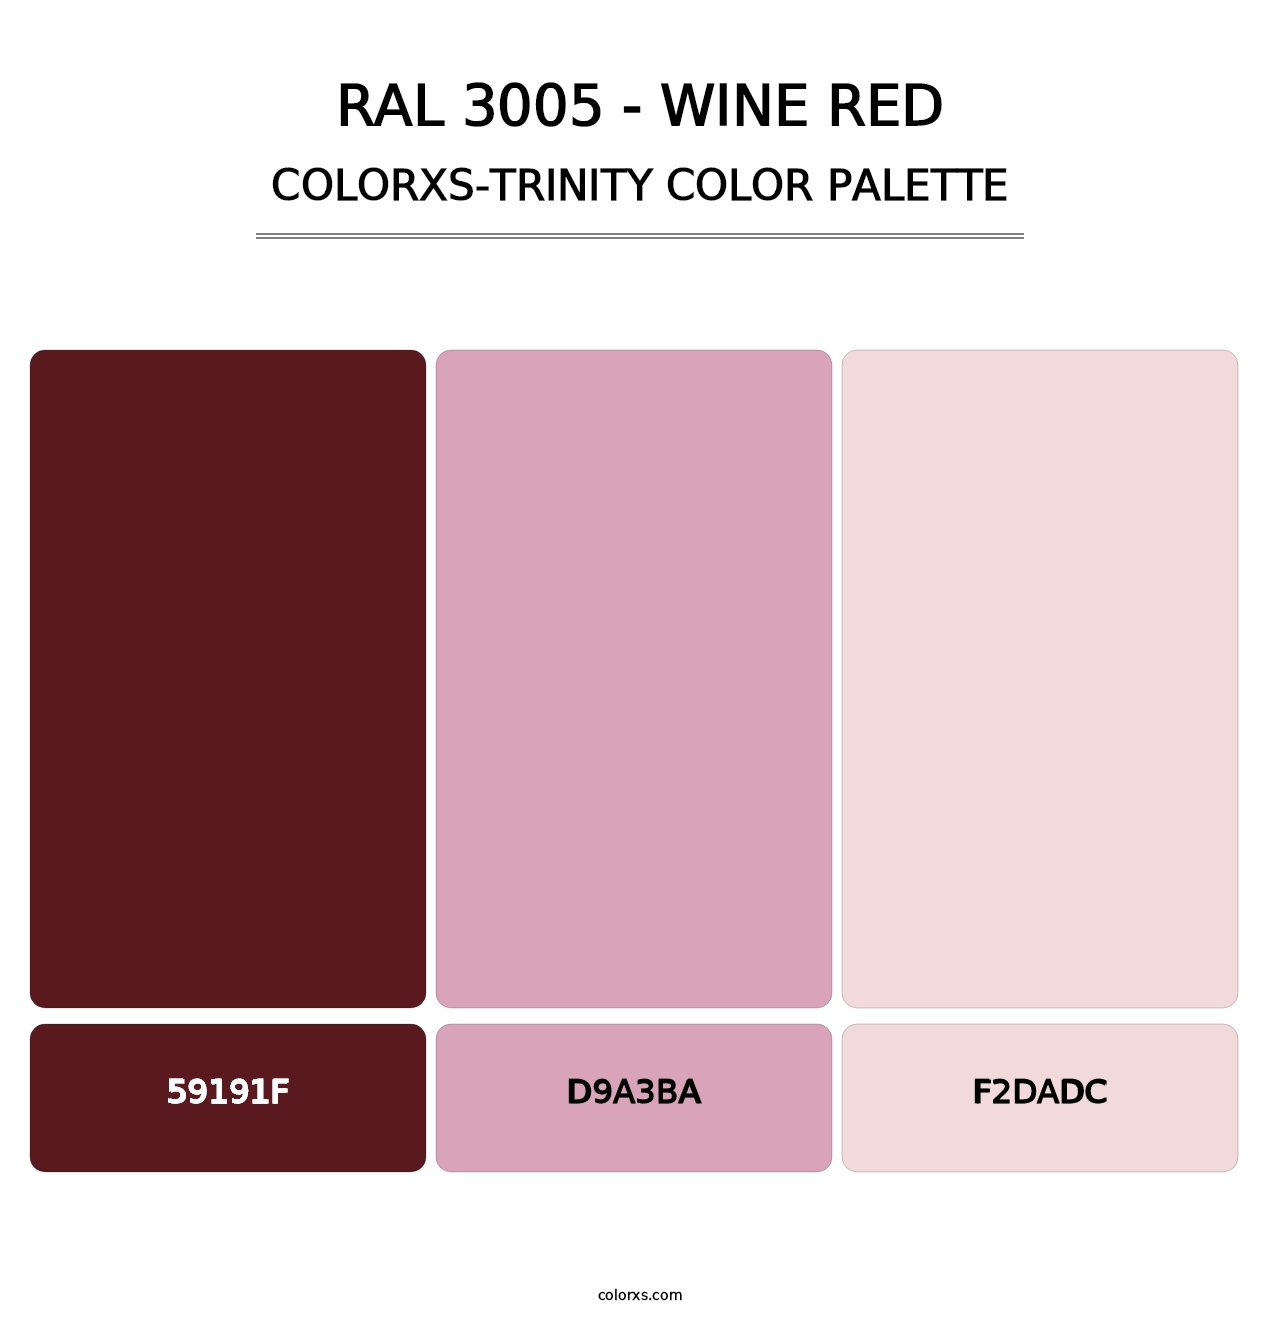 RAL 3005 - Wine Red - Colorxs Trinity Palette